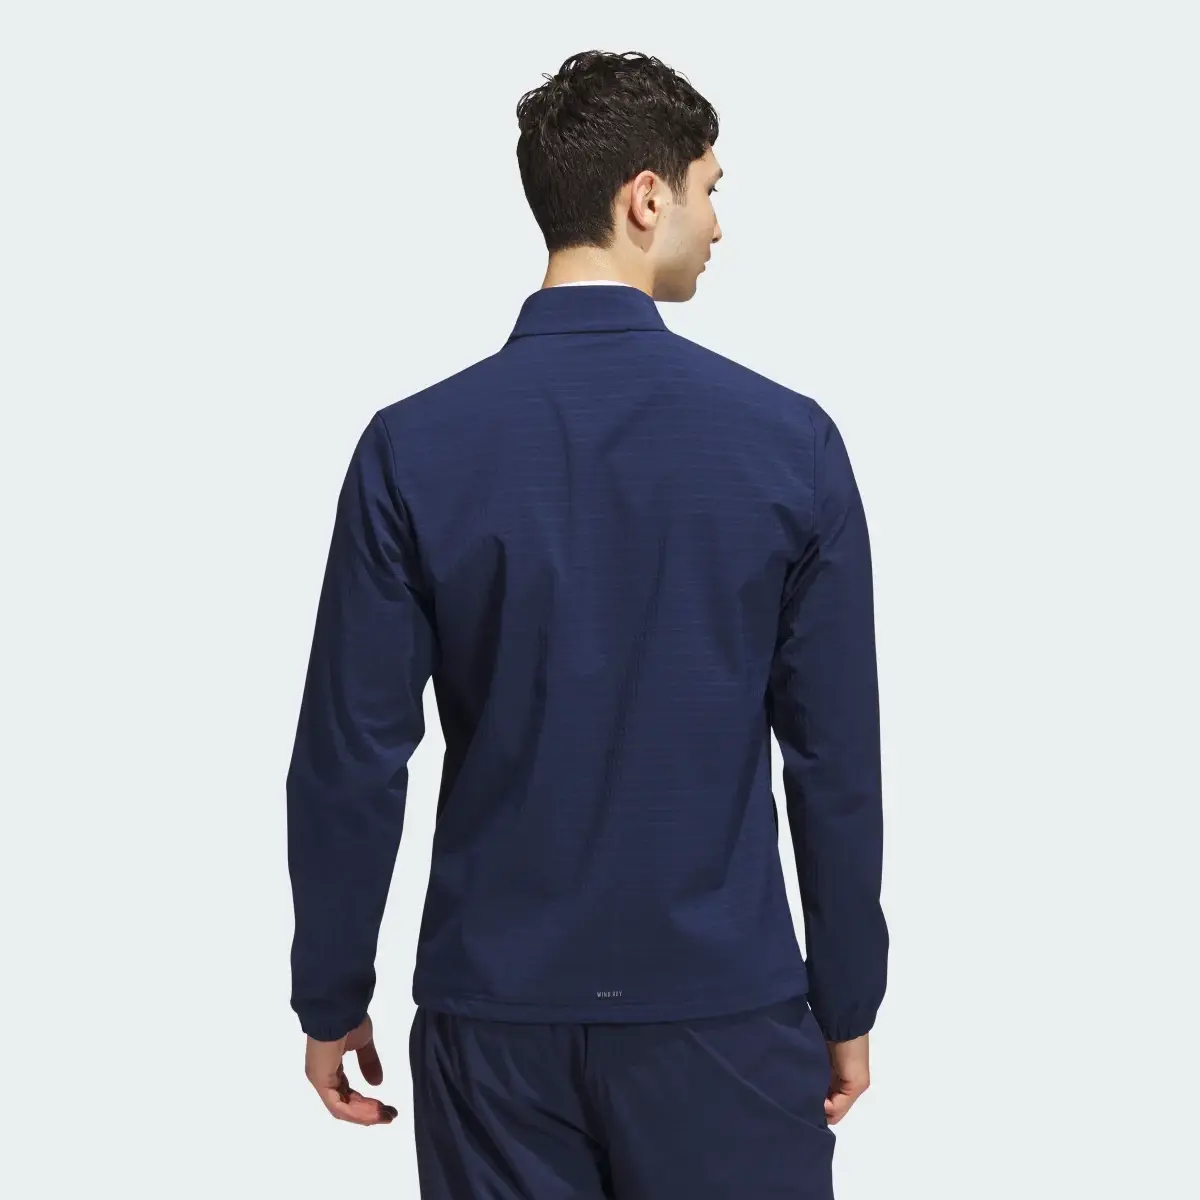 Adidas Ultimate365 Tour WIND.RDY Half-Zip Pullover. 3